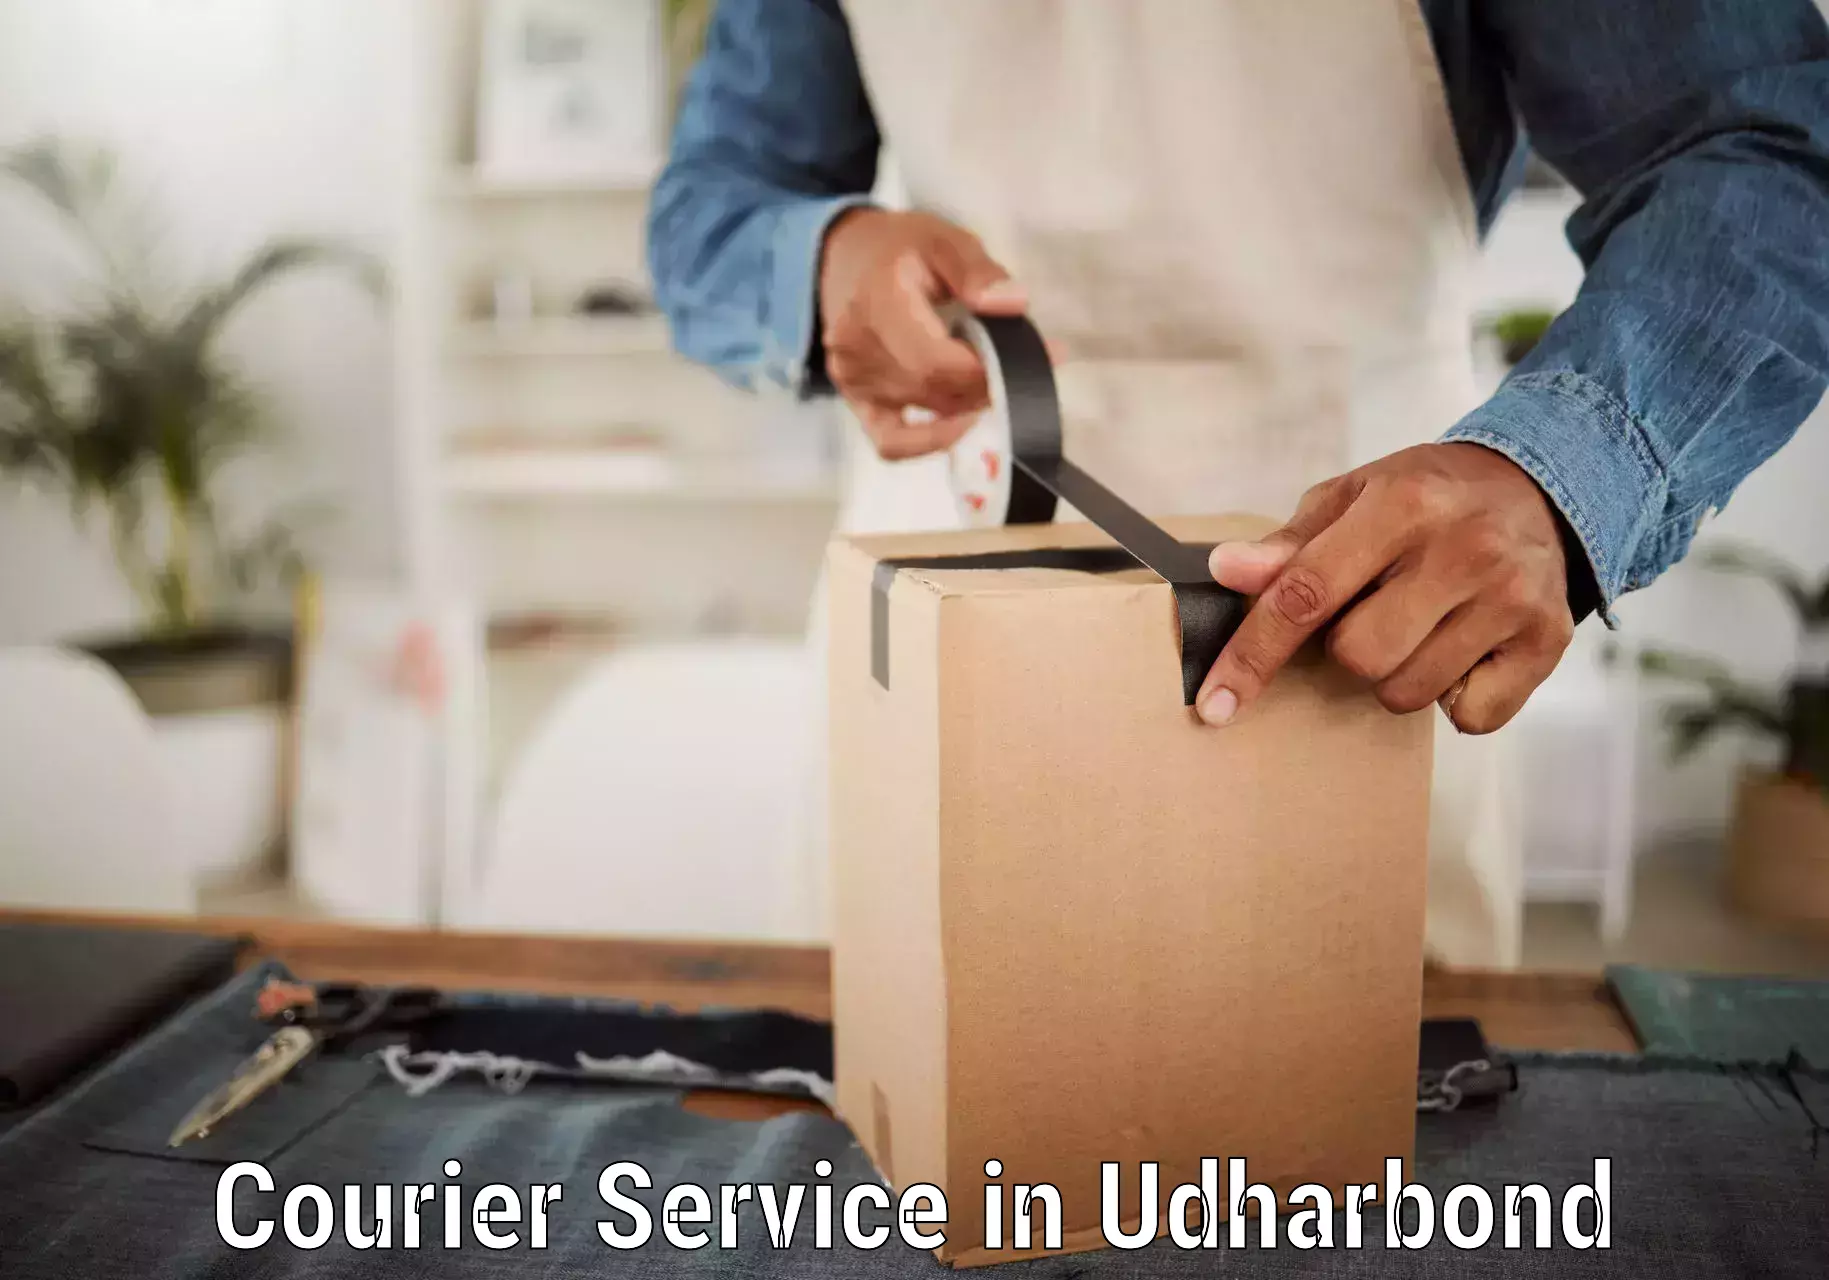 Quality courier services in Udharbond